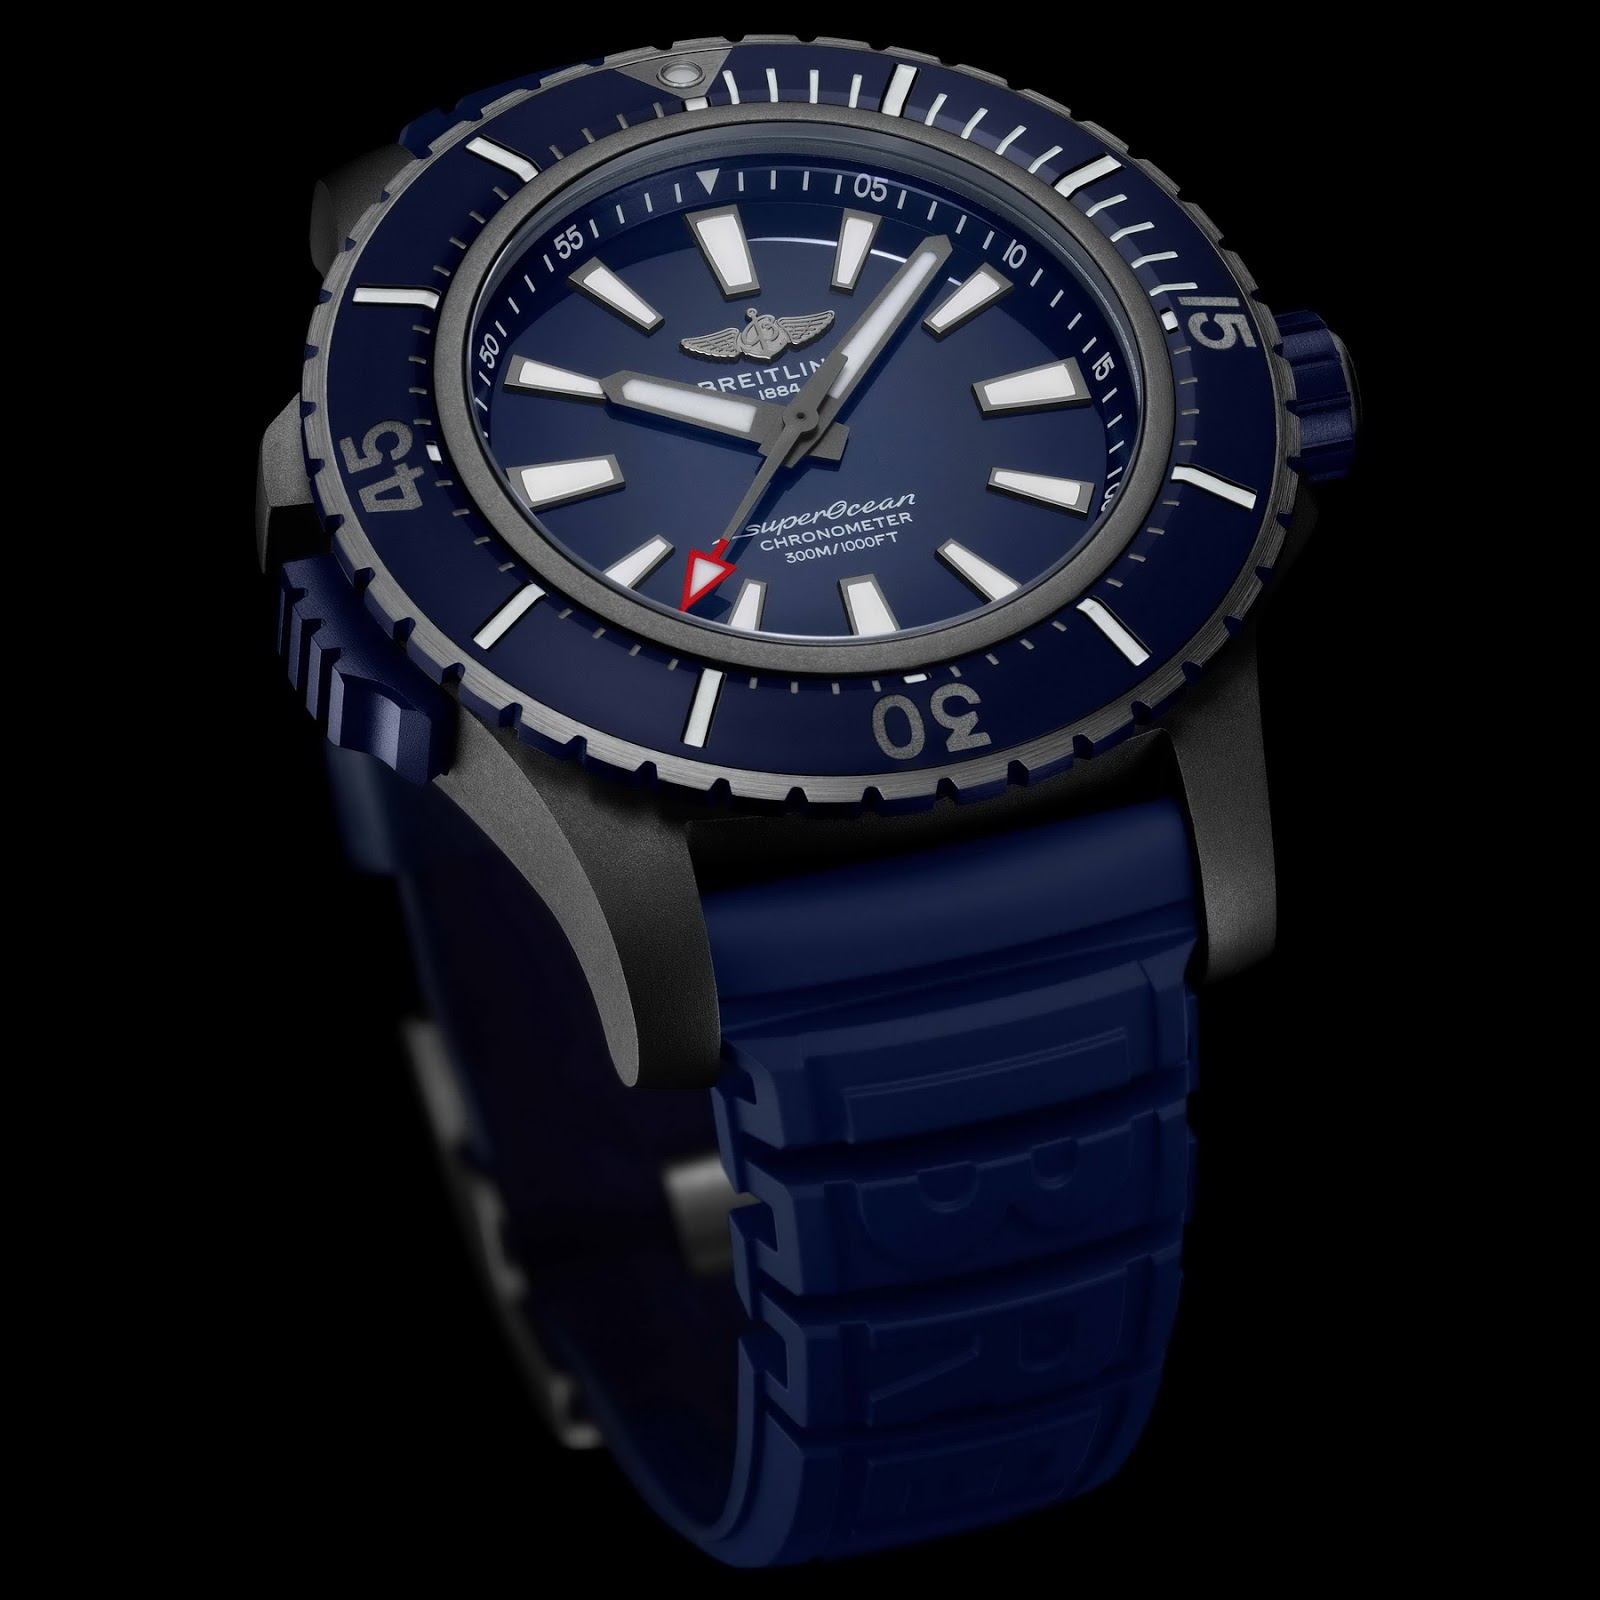 Breitling's newest from Baselworld 2019 BREITLING%2BSuperocean%2B48%2B01